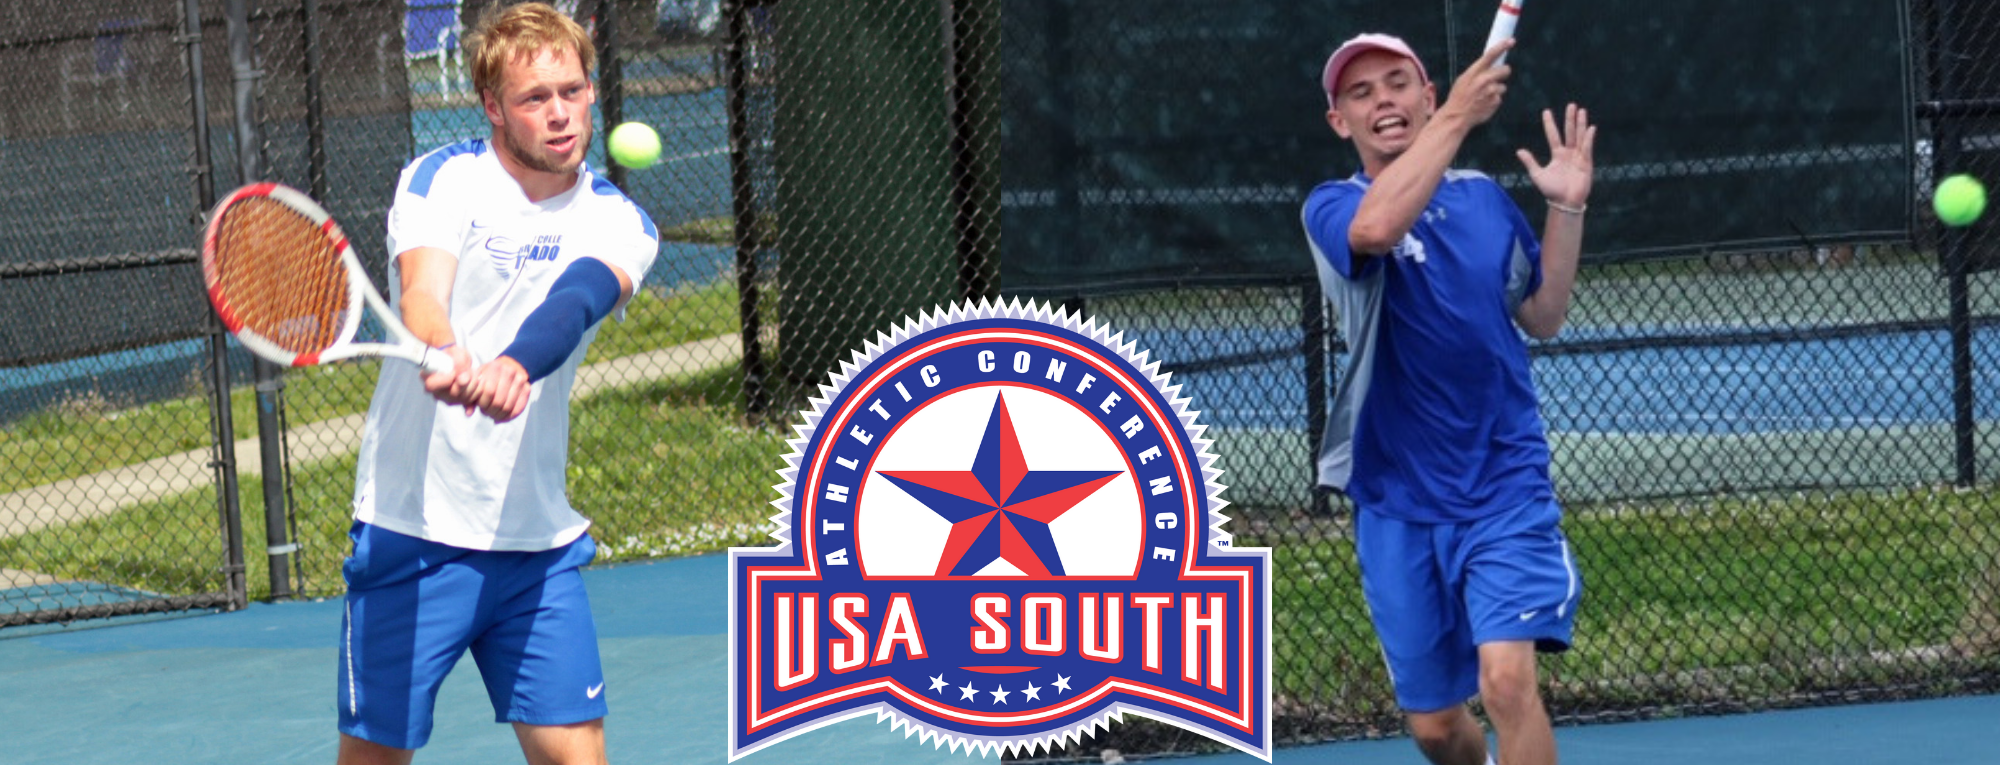 Tim Hengst and Tyler Frazee Sweep USA South Men’s Tennis Weekly Awards